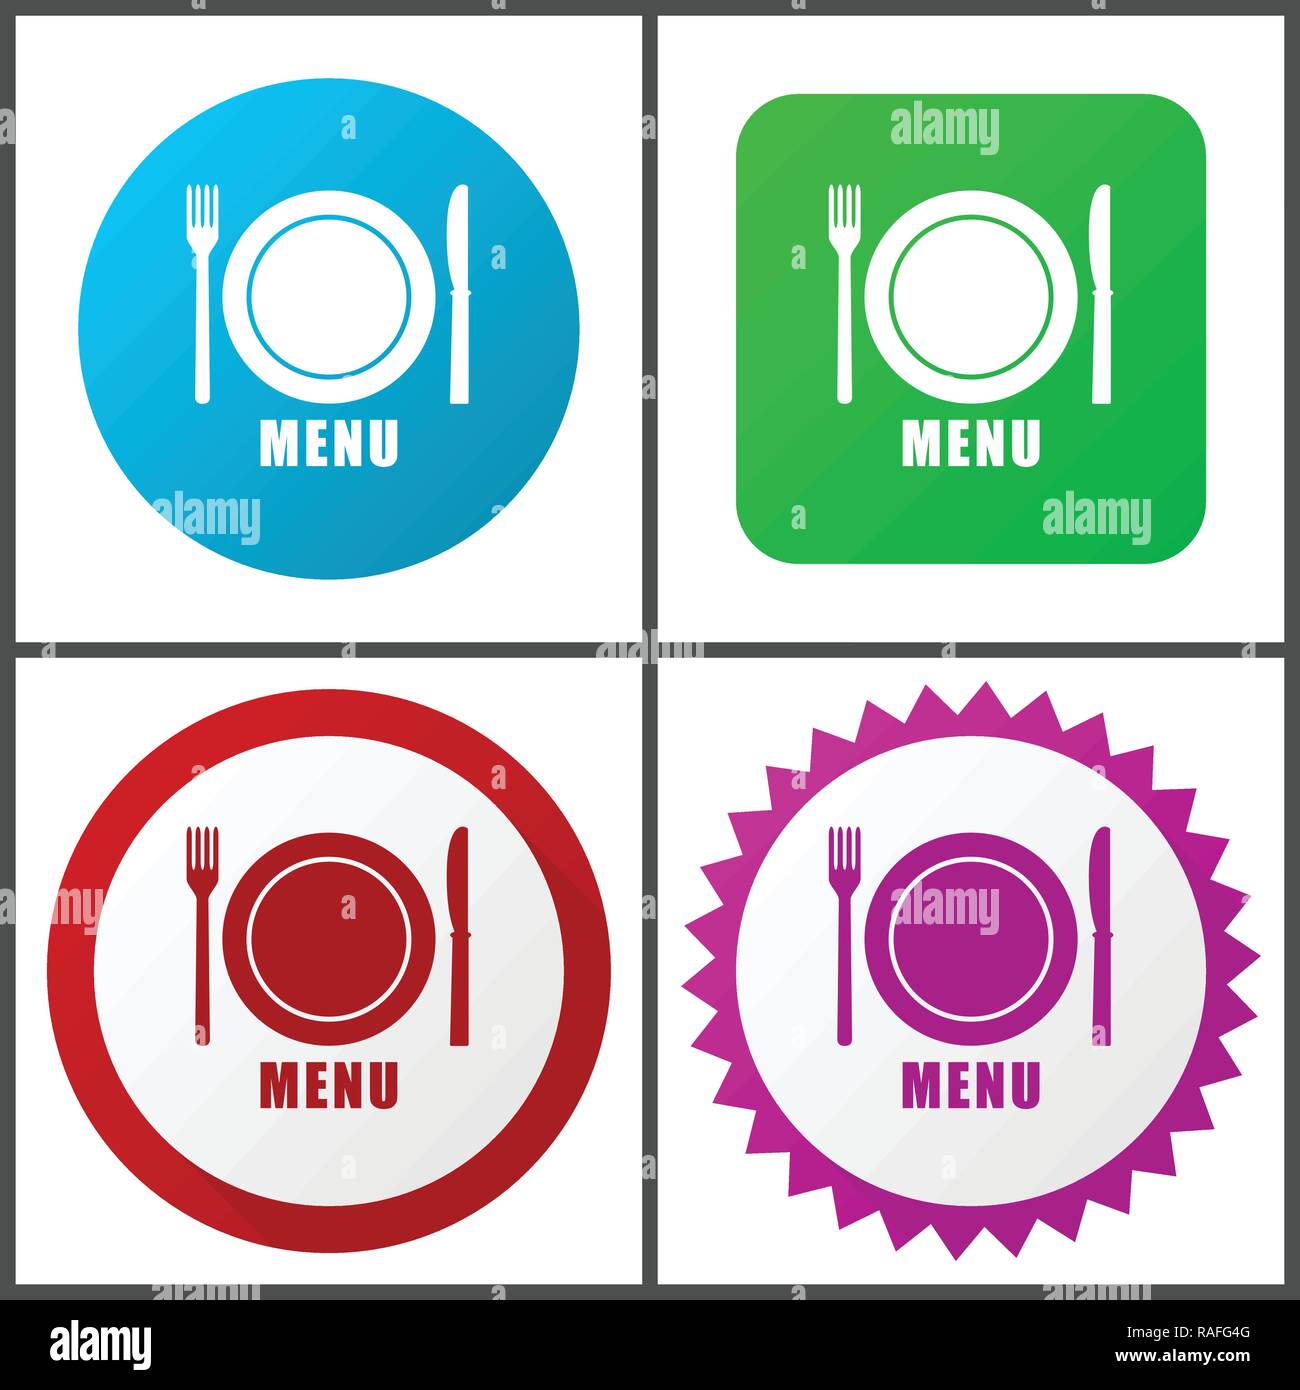 Menu vector icon set. Flat design web icons in eps 10. Colorful internet buttons in four versions Stock Vector